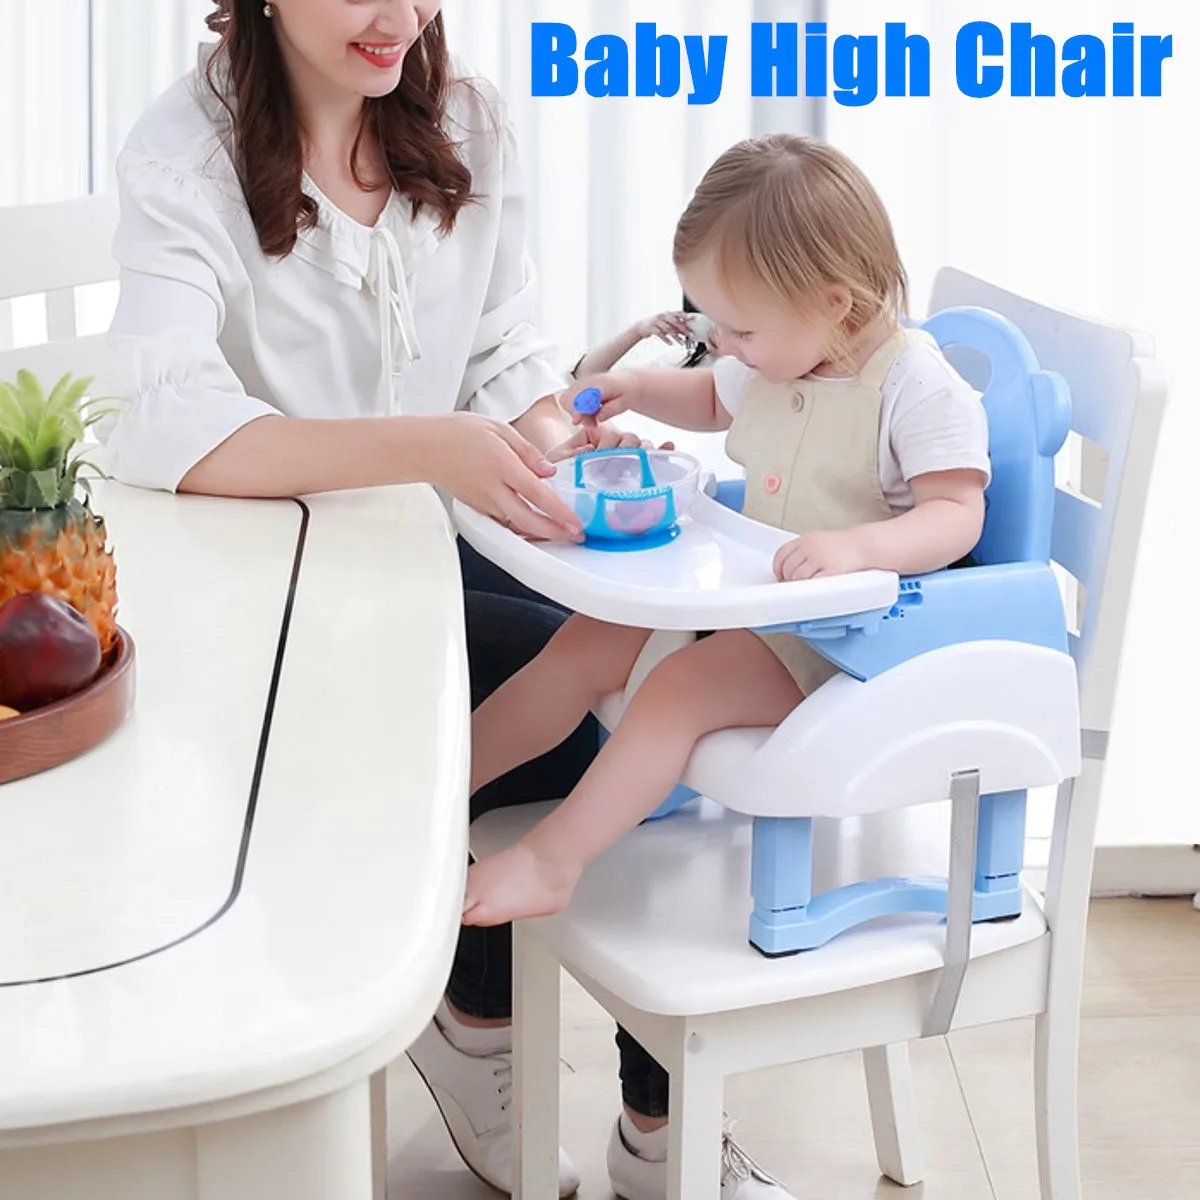 

4-in-1 Multifunctional Adjustable Tray Foldable Portable Kids Baby High Chair With Wheeled Seat Cushion Baby Feeding HighChair